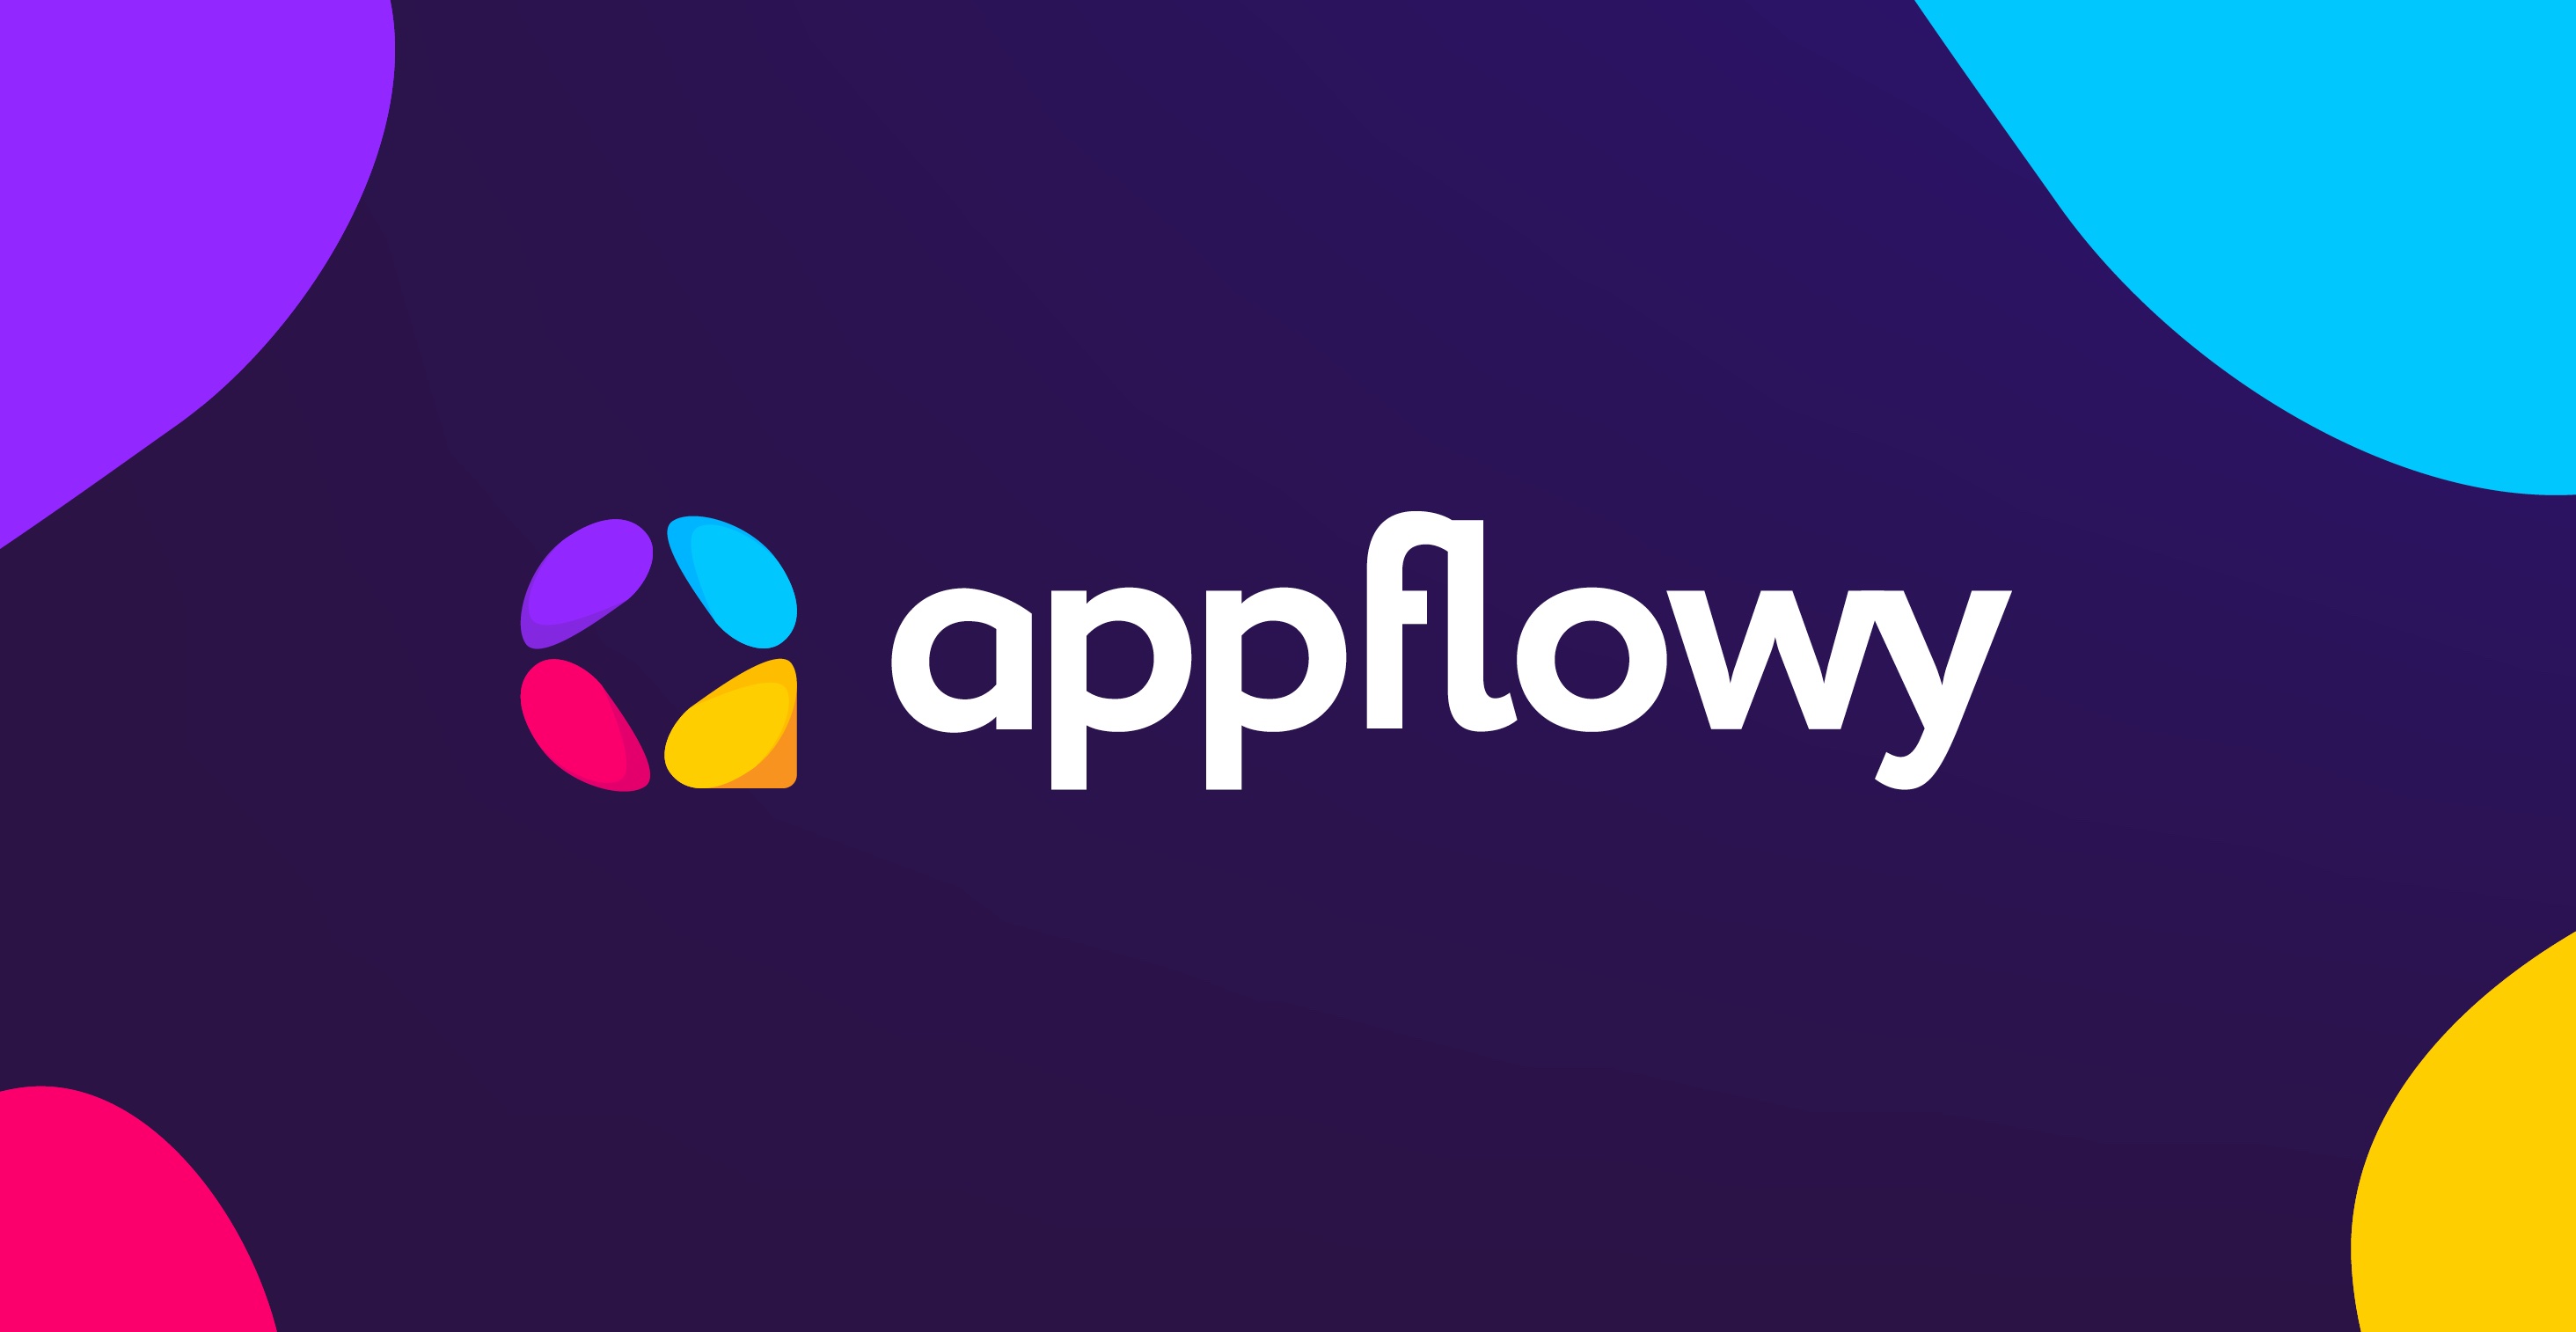 appflowy-an-open-source-notion-alternative-supported-by-industry-giants